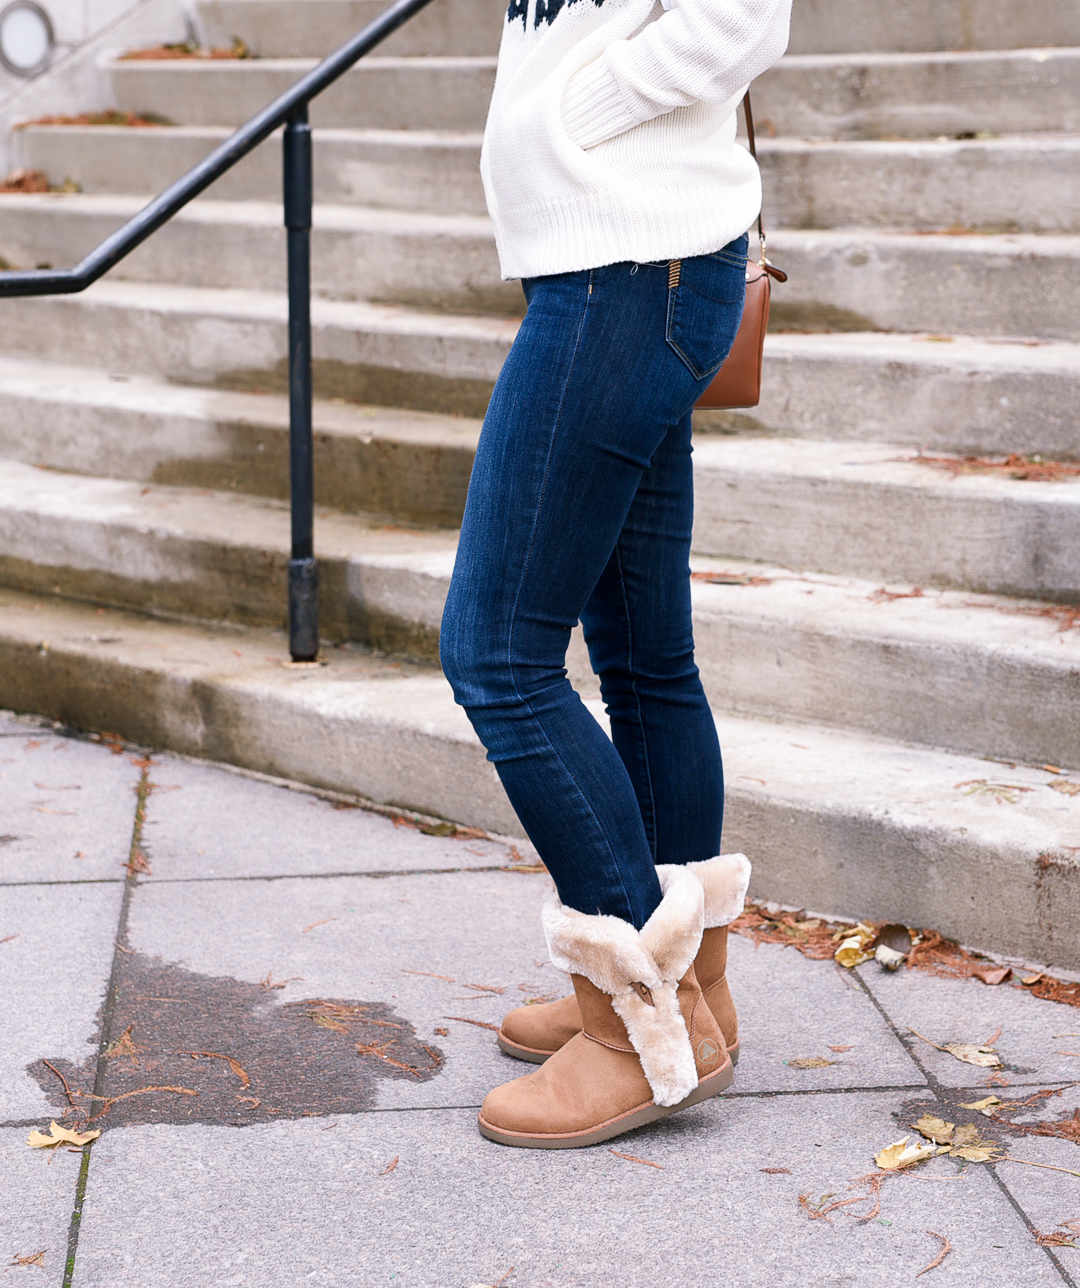 Comfortable leather and faux fur boots. 